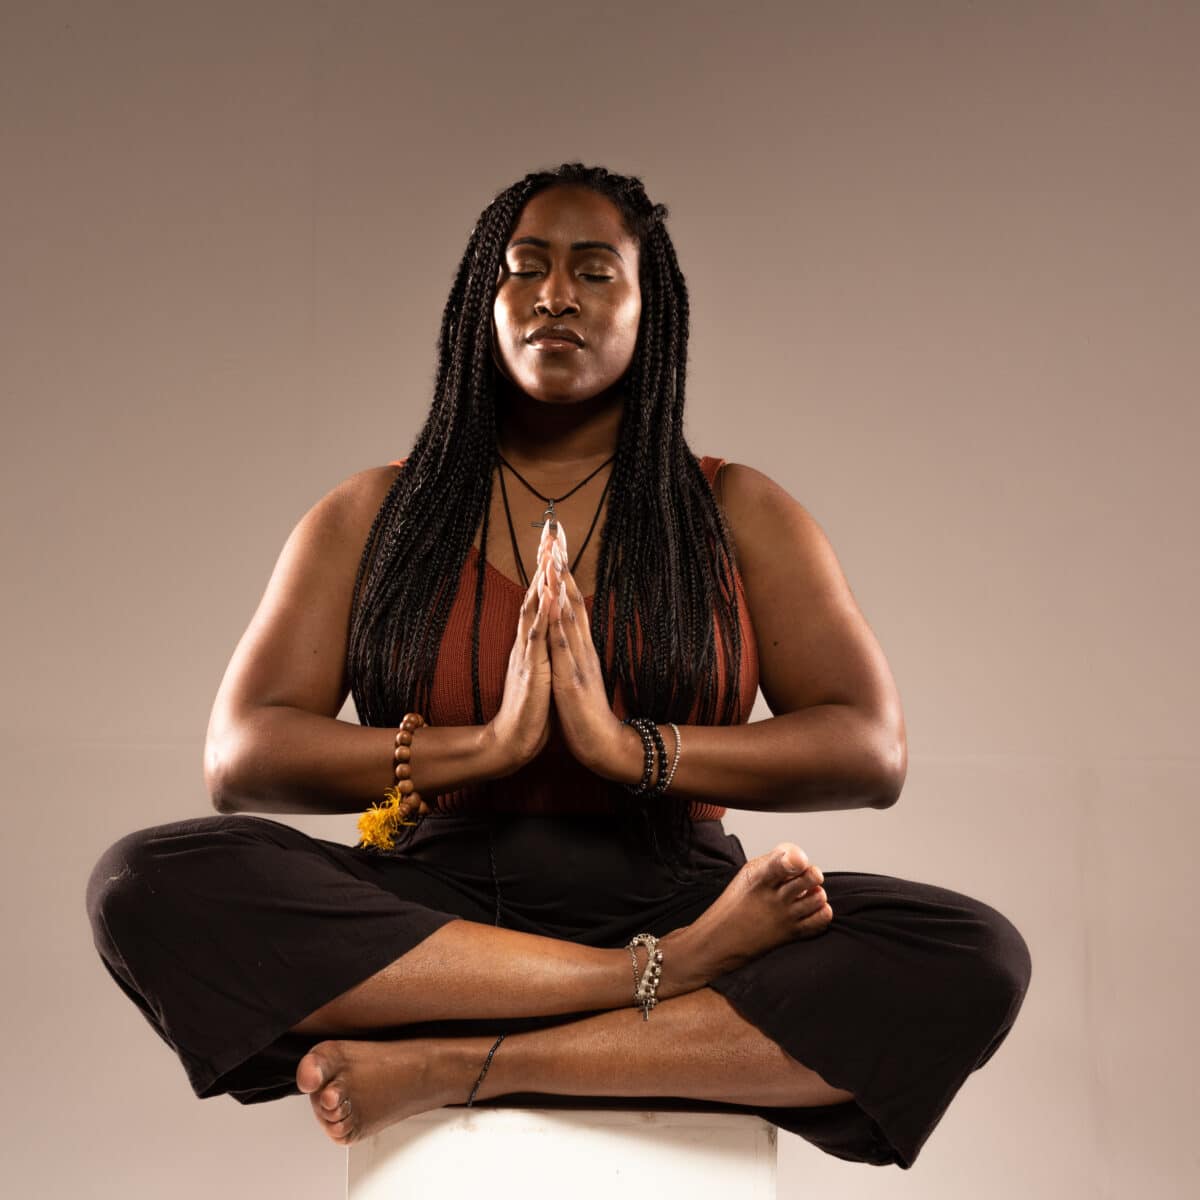 Woman sat in a meditative pose with legs cross, hands pressed together and eyes closed.